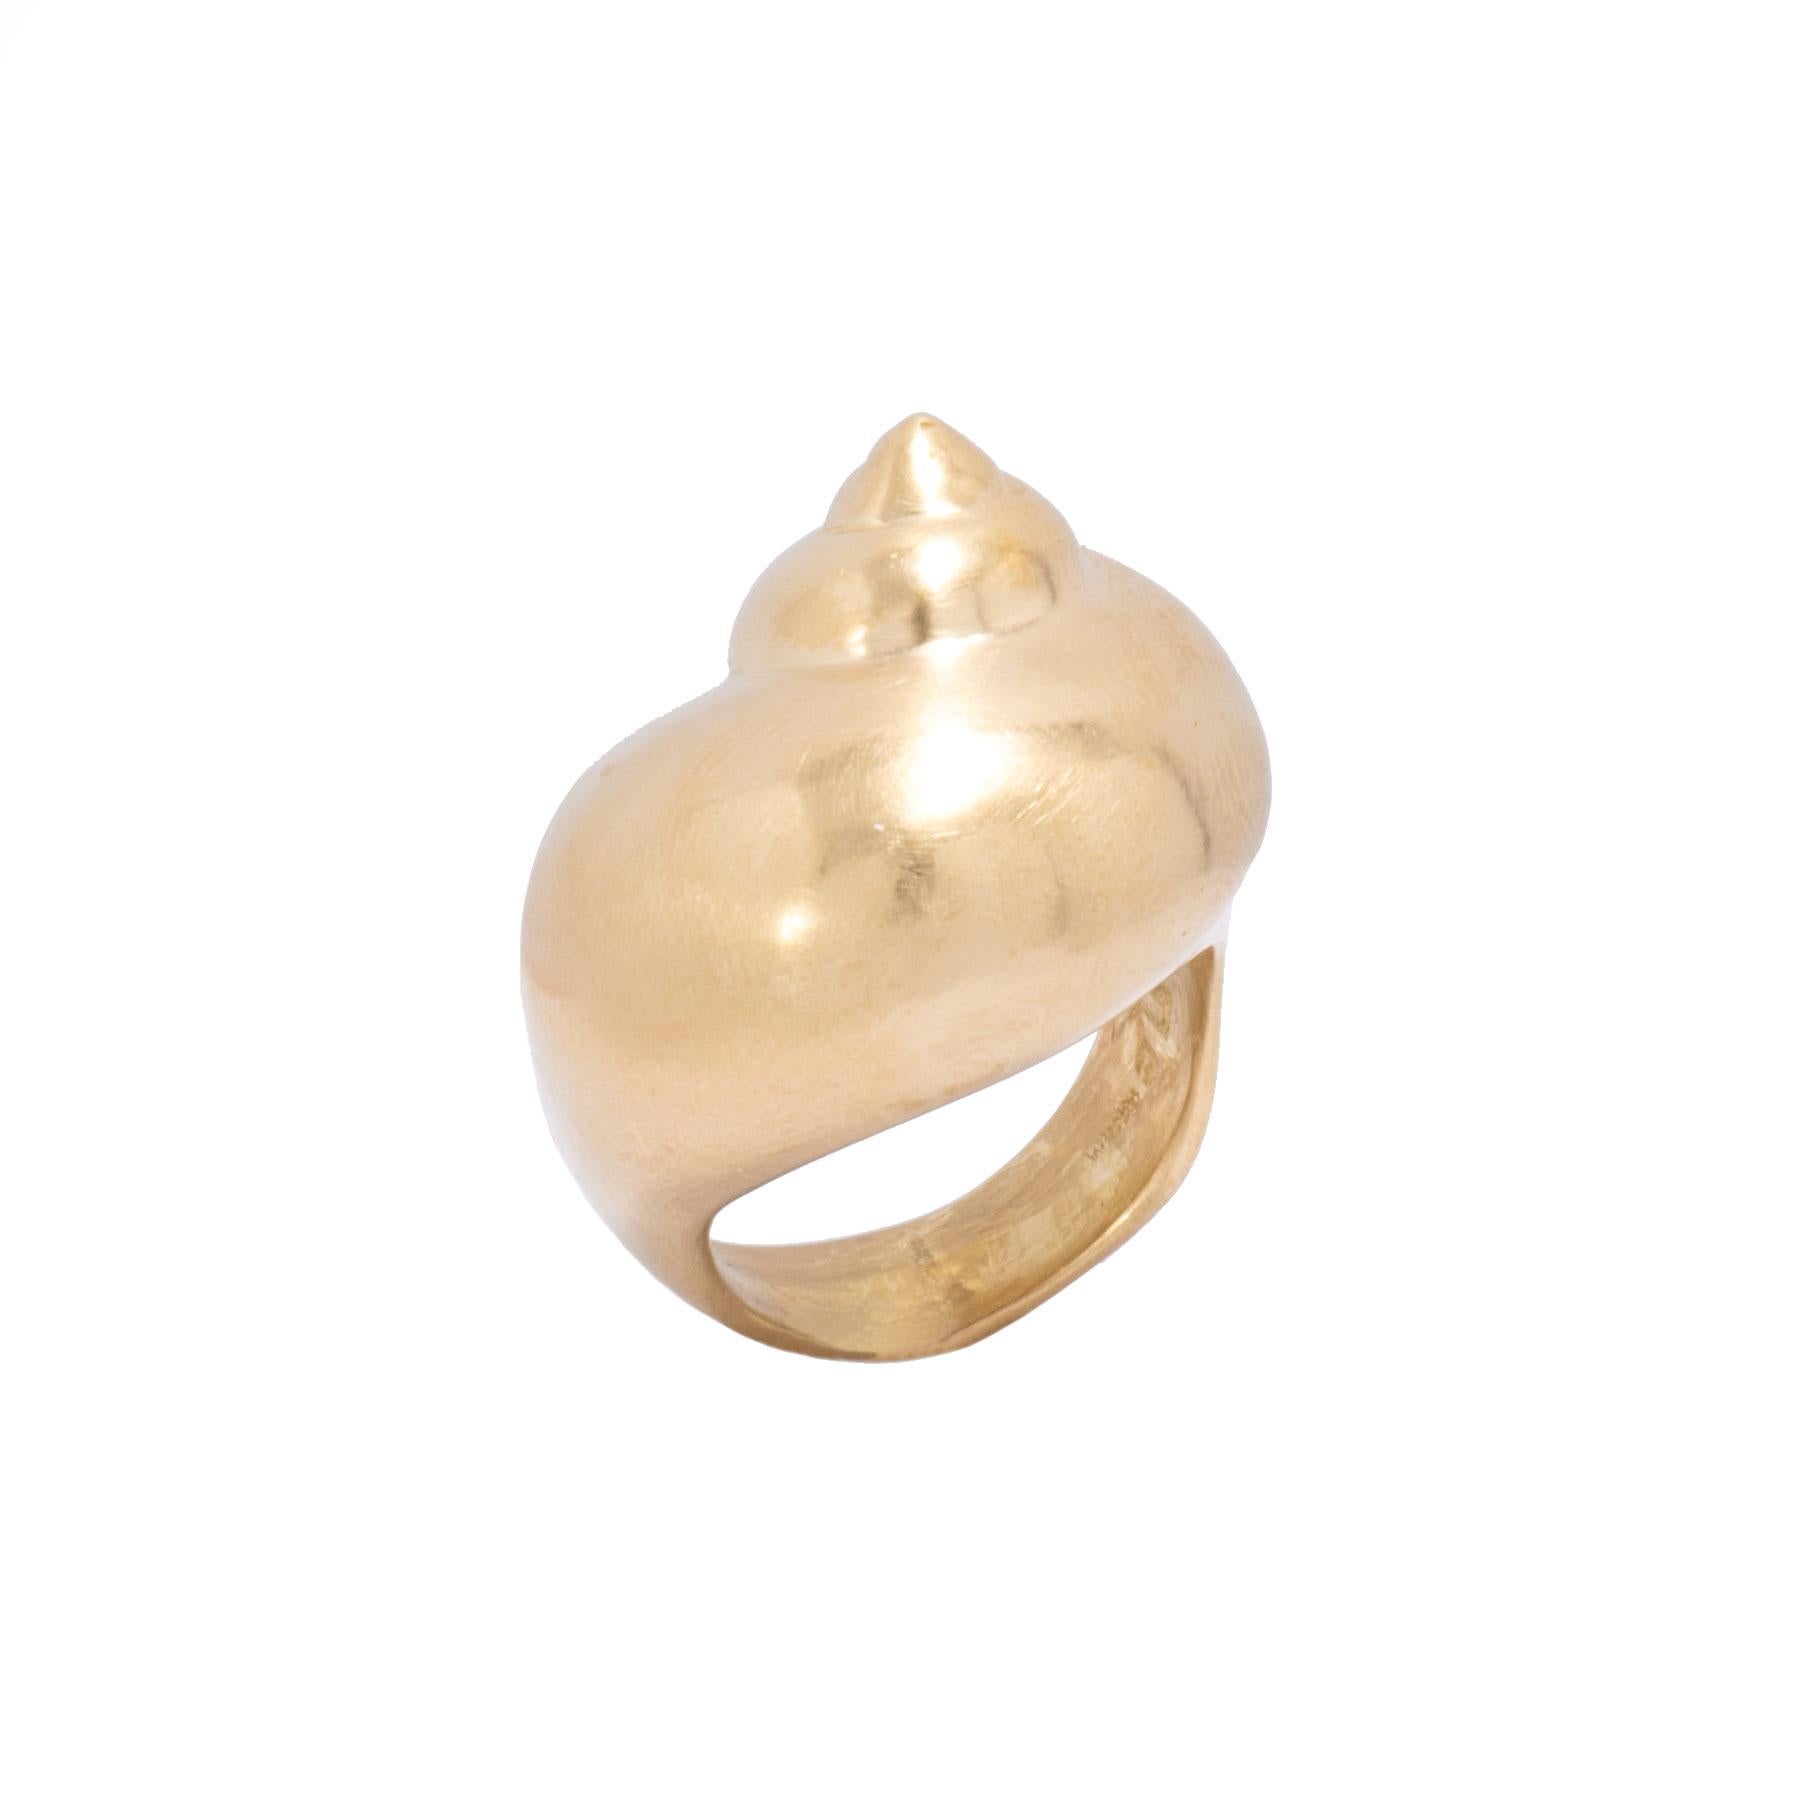 Our large turban shell ring is hand crafted in our studio of 18k gold and is a tribute to the sea. Carved to sit on the finger so that it's profile changes with the perspective, this ring is crafted with our signature satin finish. While the turban